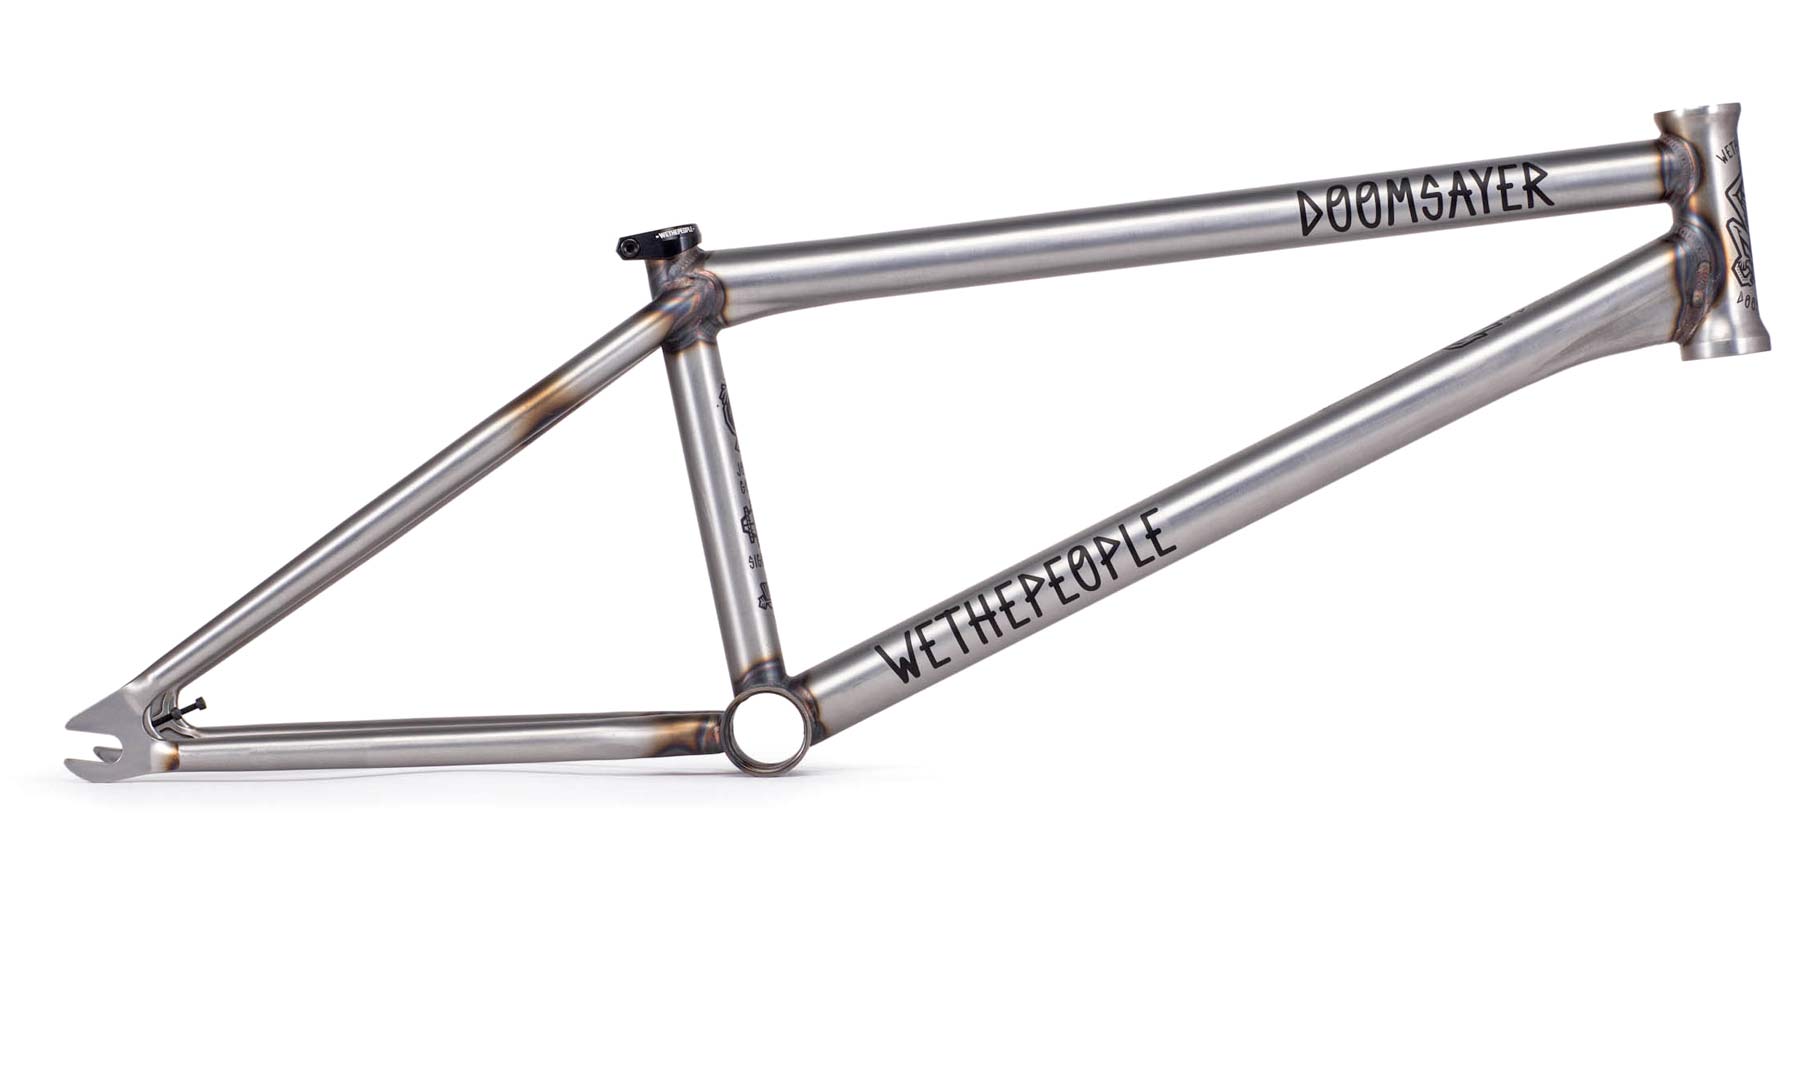 Win a Wethepeople Doomsayer BMX in time for the holidays!